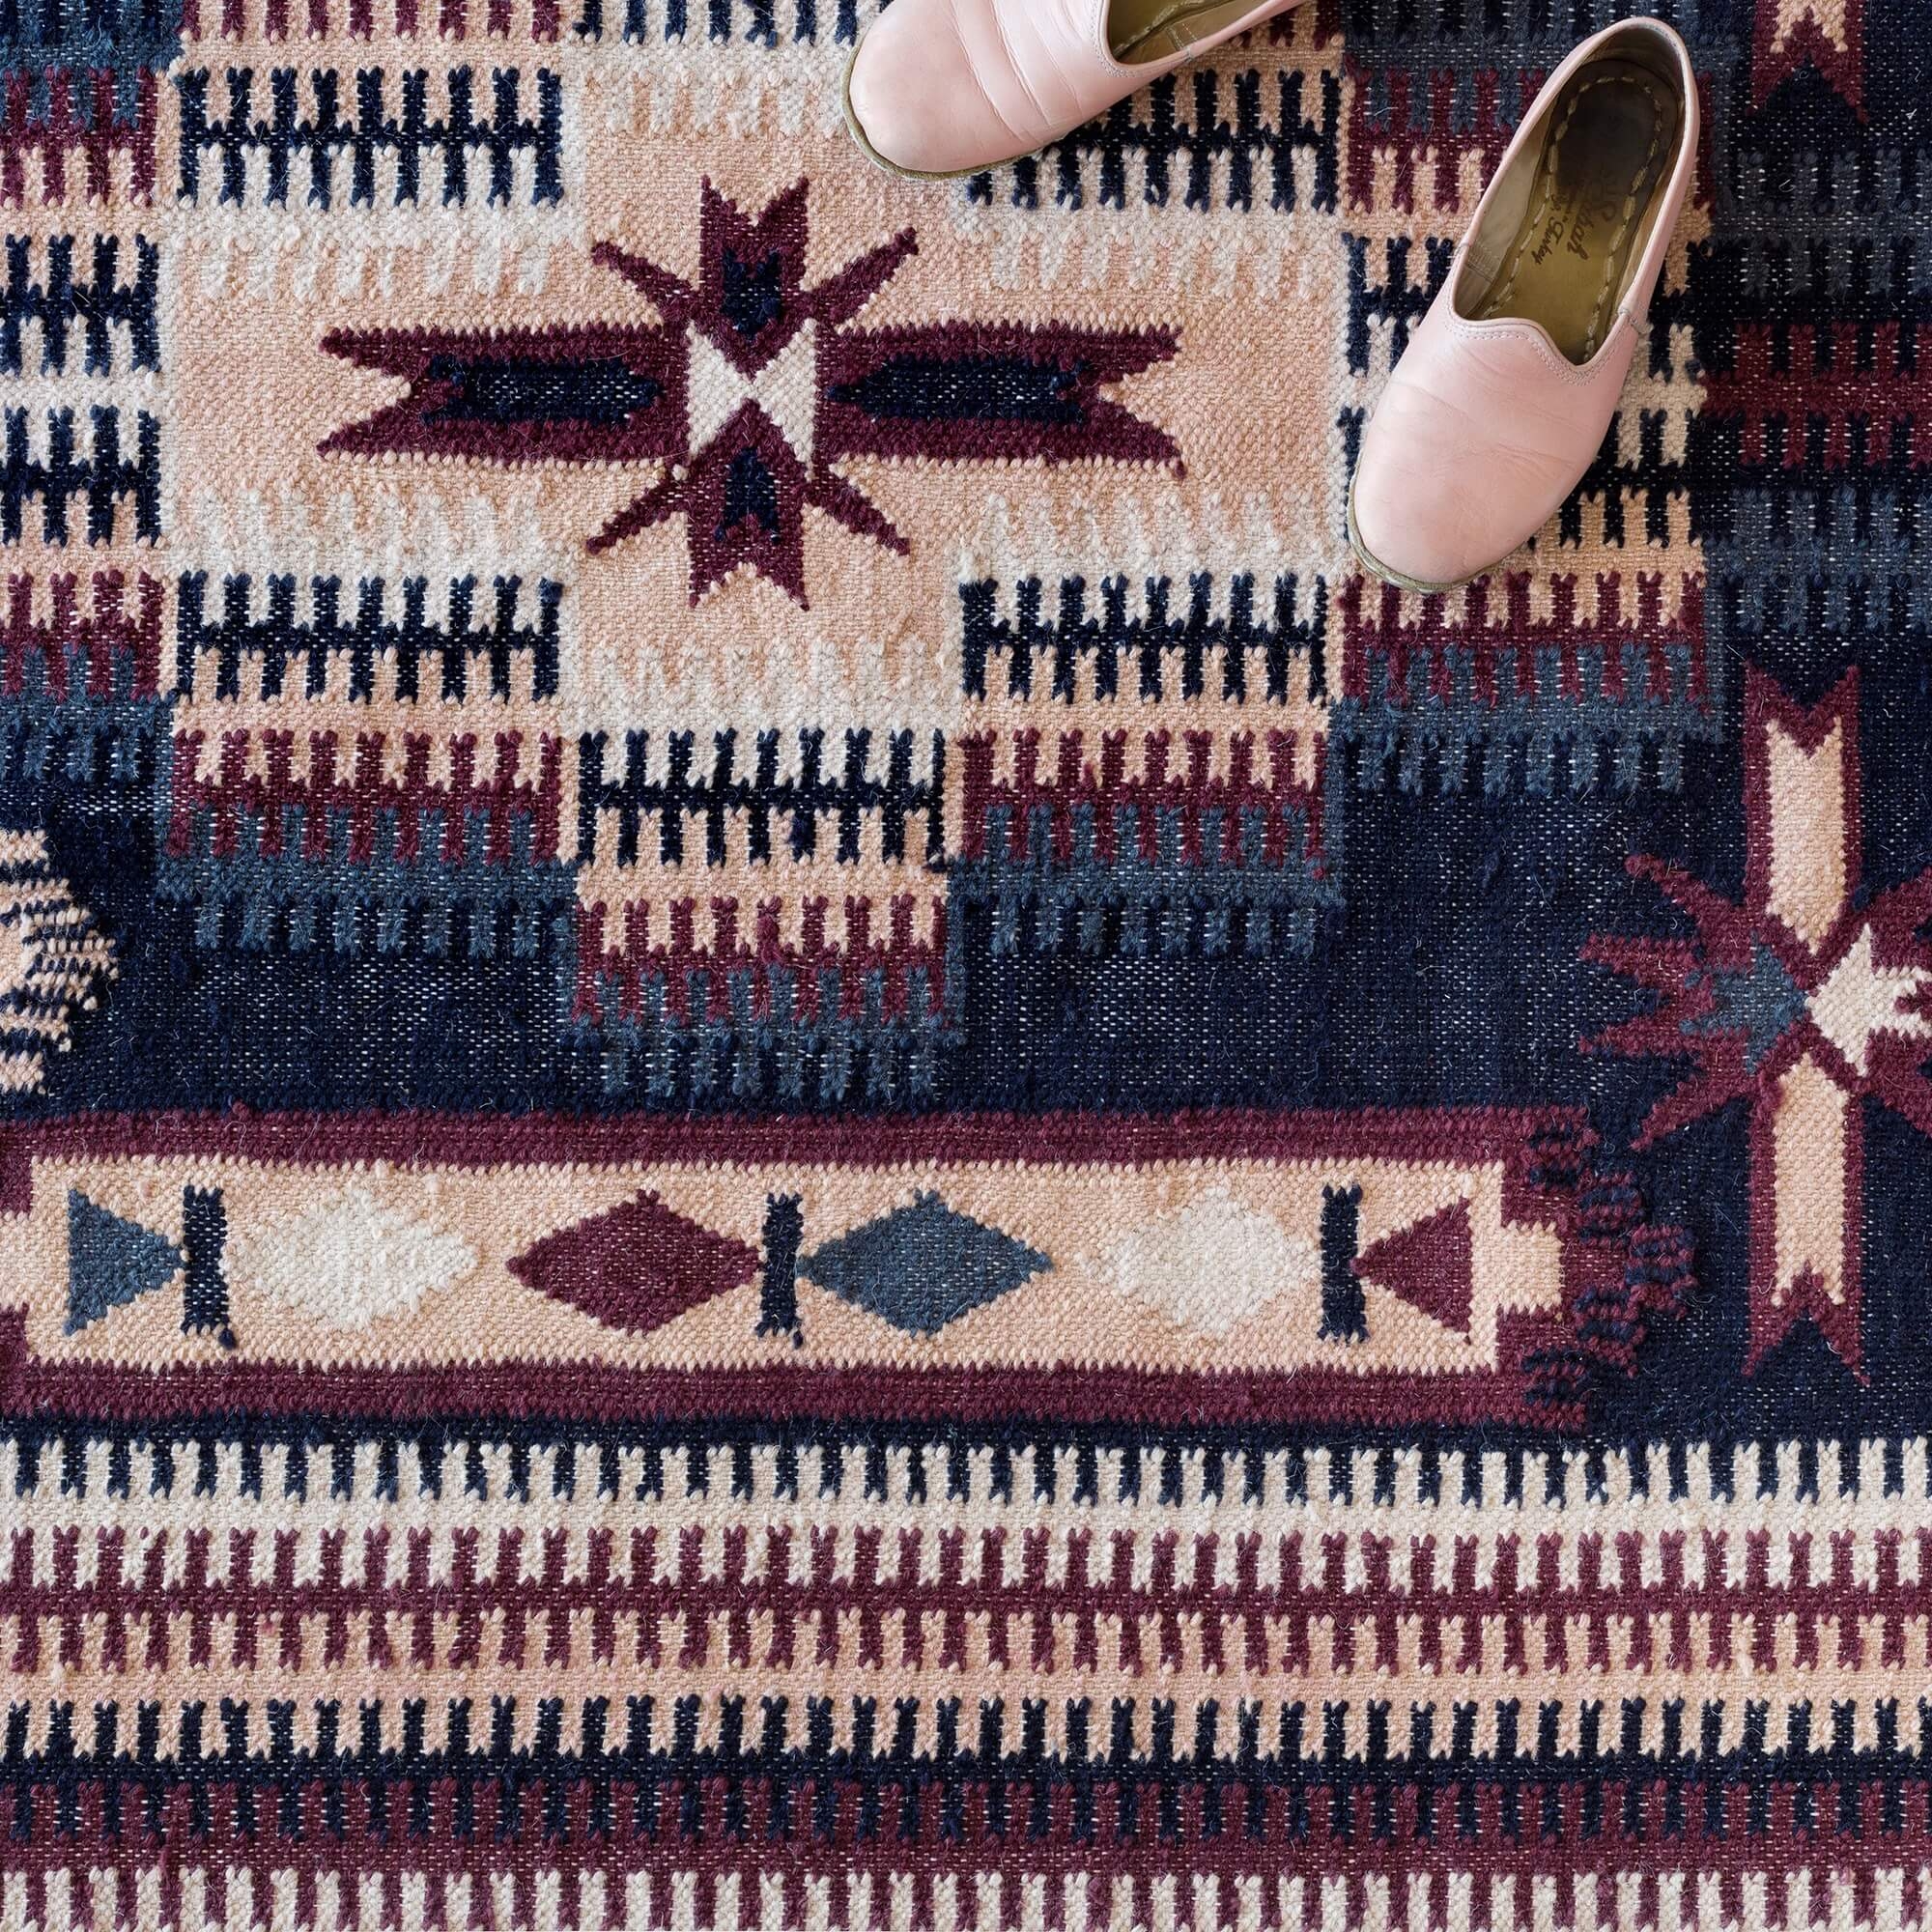 The Citizenry Keya Handwoven Area Rug | 5' x 8' | Made You Blush - Image 3